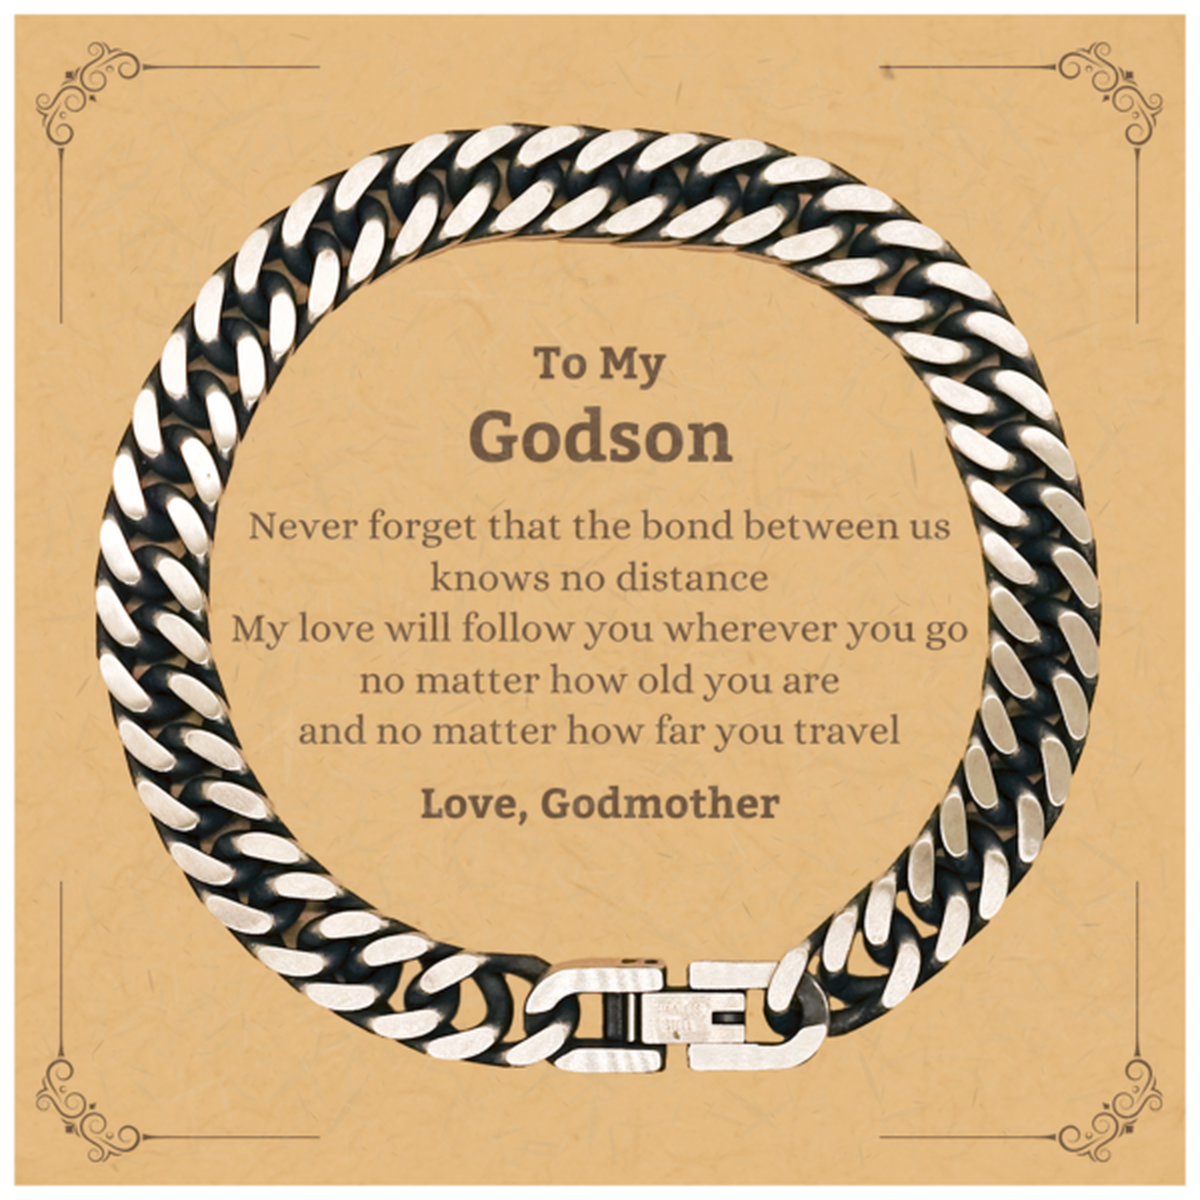 Godson Birthday Gifts from Godmother, Adjustable Cuban Link Chain Bracelet for Godson Christmas Graduation Unique Gifts Godson Never forget that the bond between us knows no distance. Love, Godmother